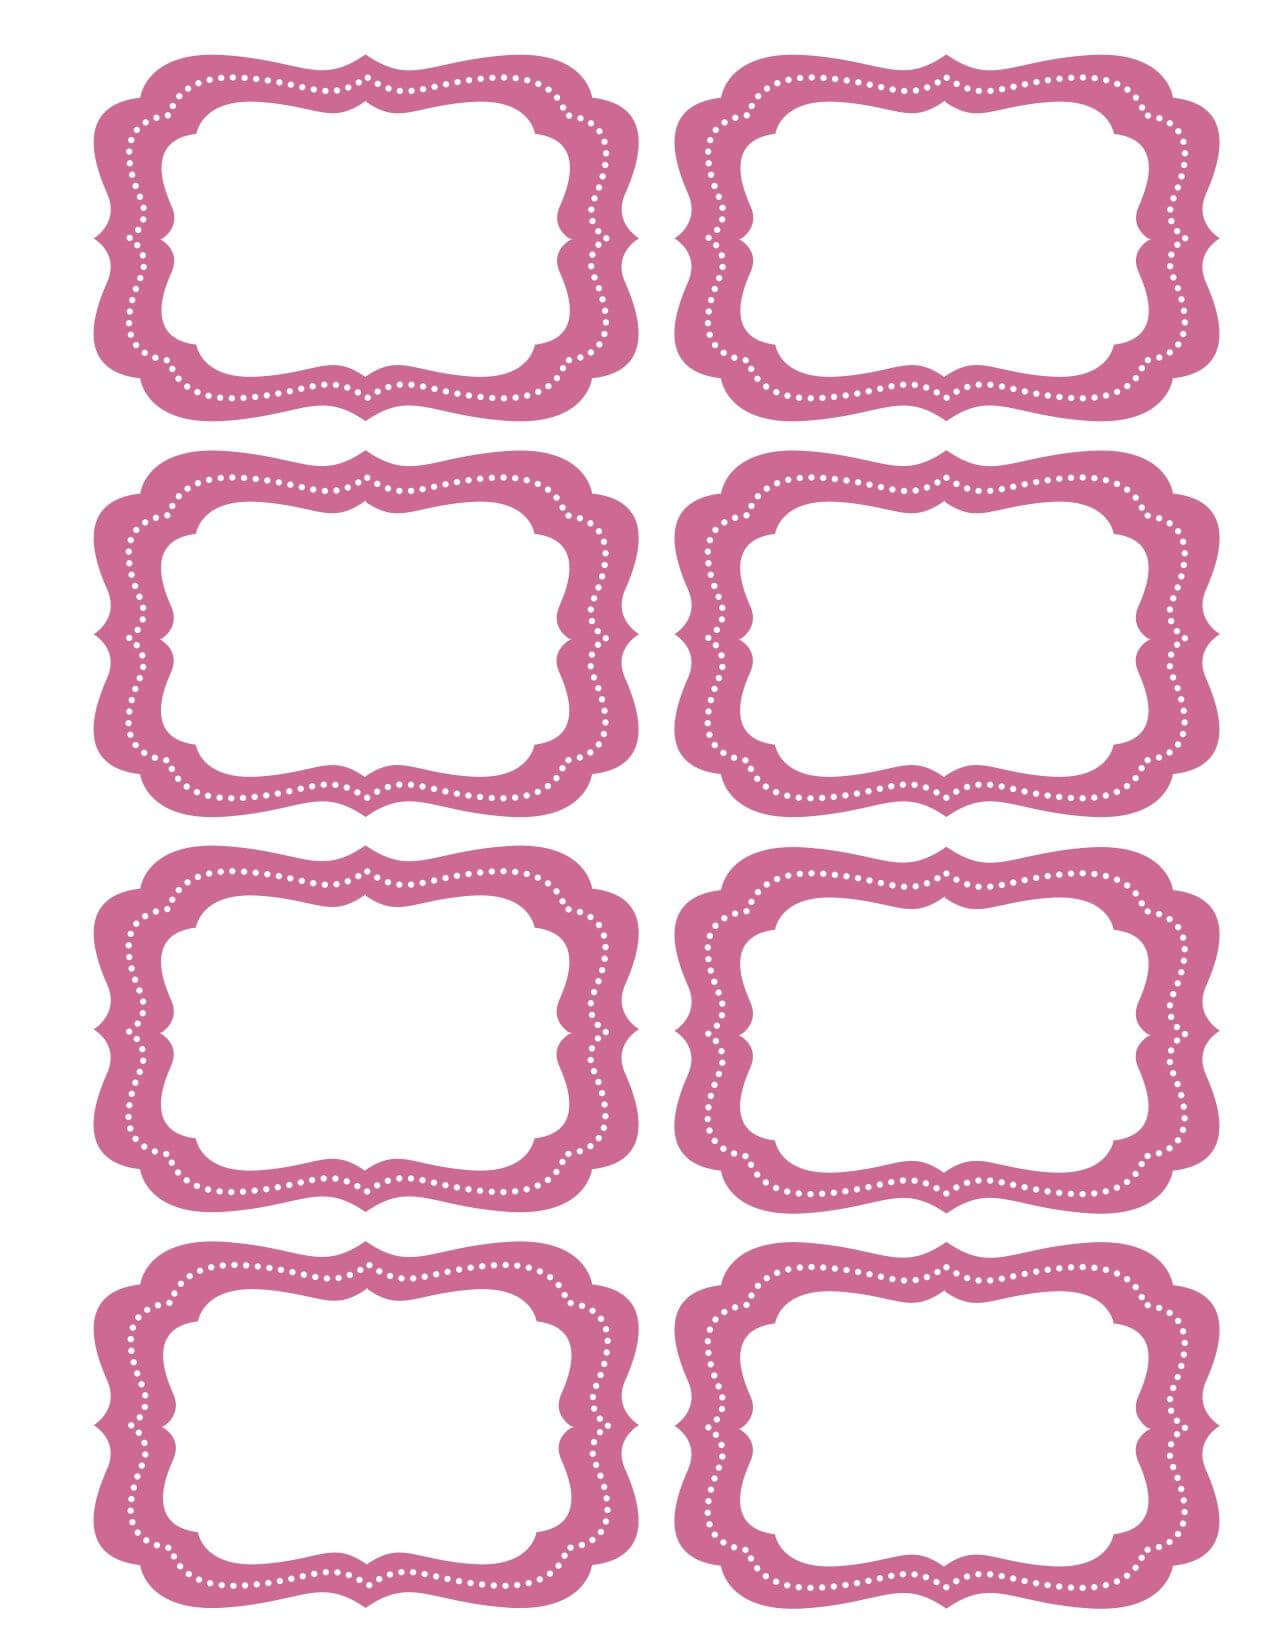 Free Printable Bag Label Templates | Candy Labels Blank Inside Blank Luggage Tag Template